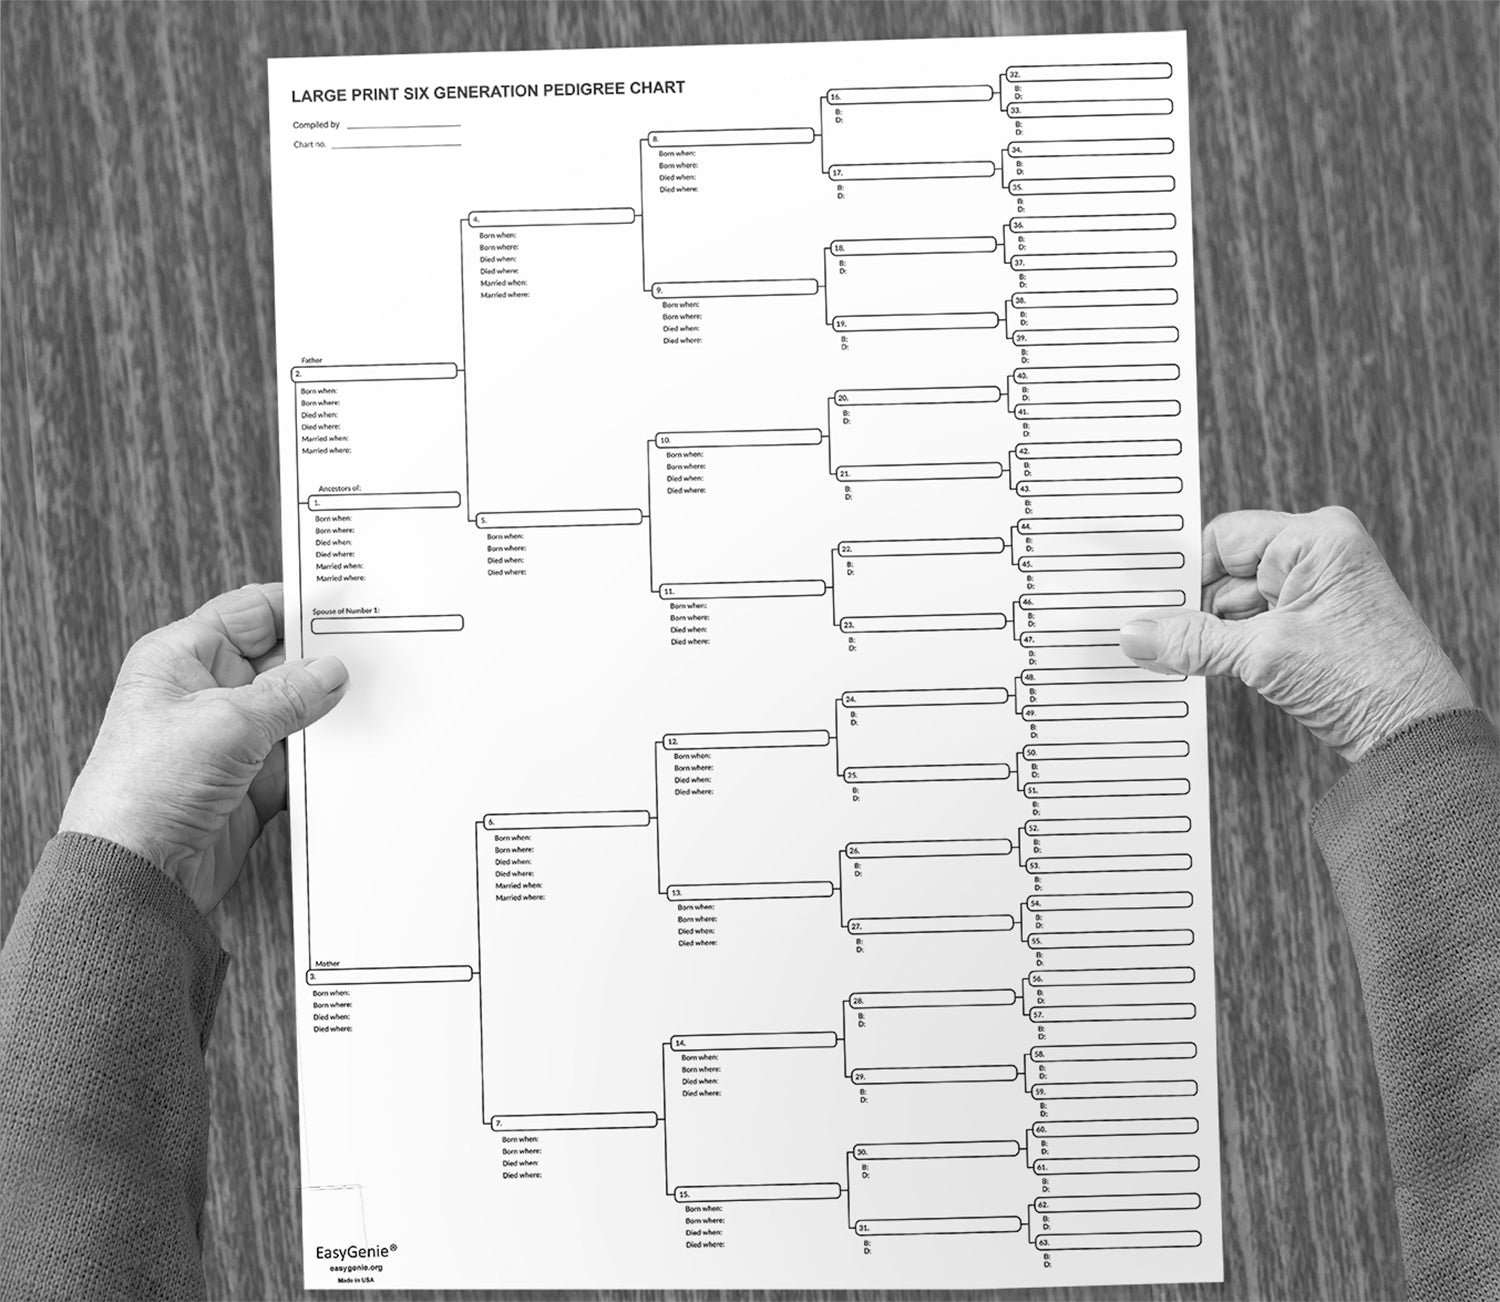 TEN LARGE PRINT 6Generation Pedigree Charts for Ancestry EasyGenie